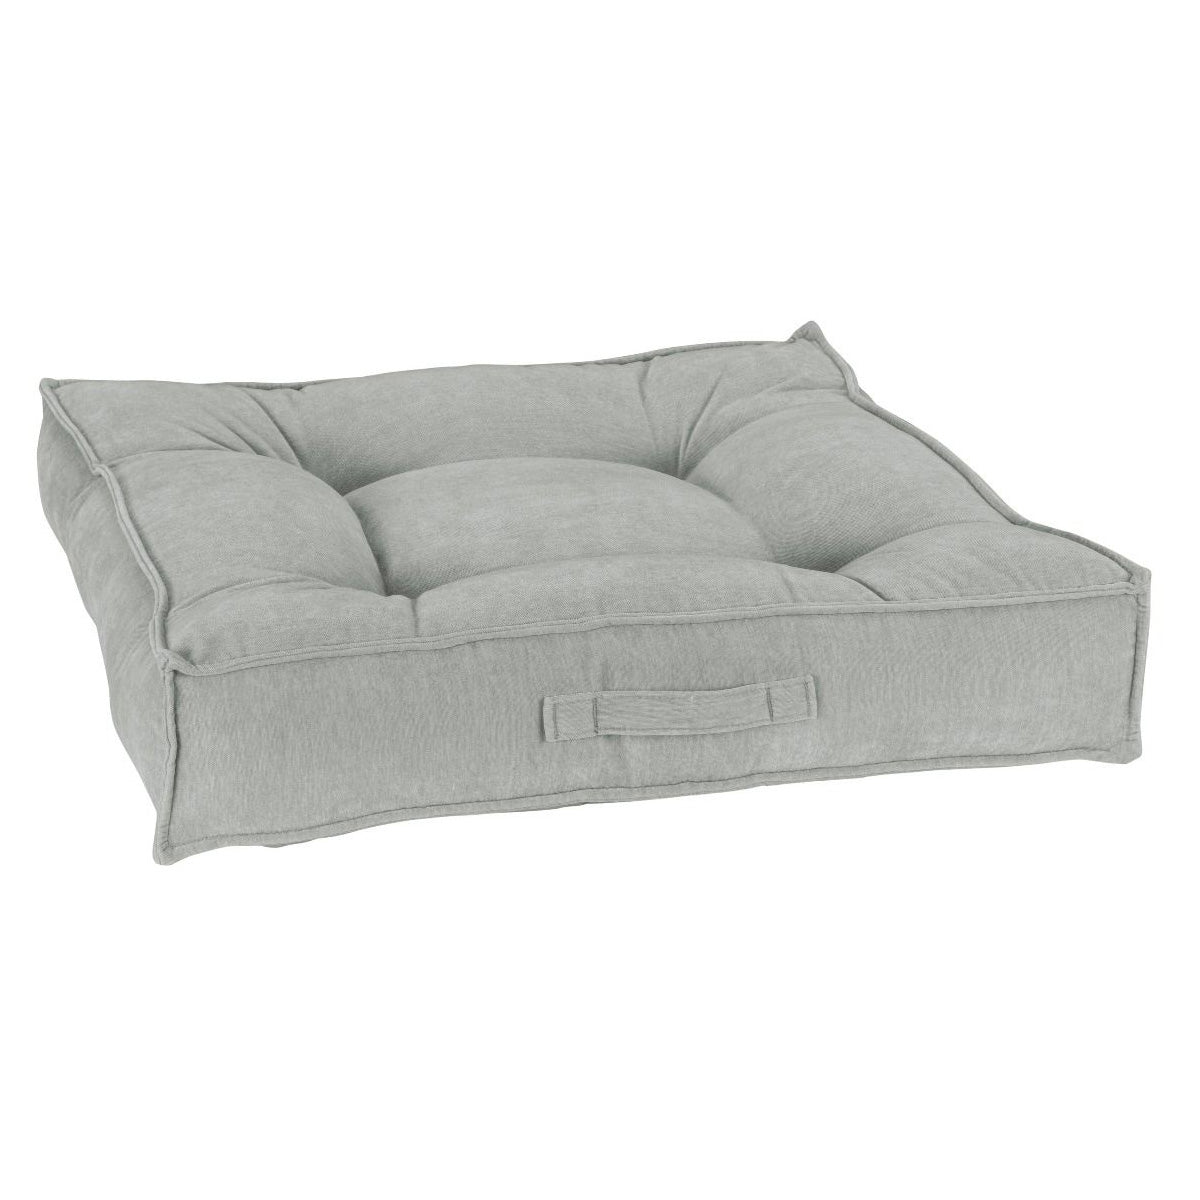 Pet Boutique - Dog Bed - Piazza Bed: Oyster